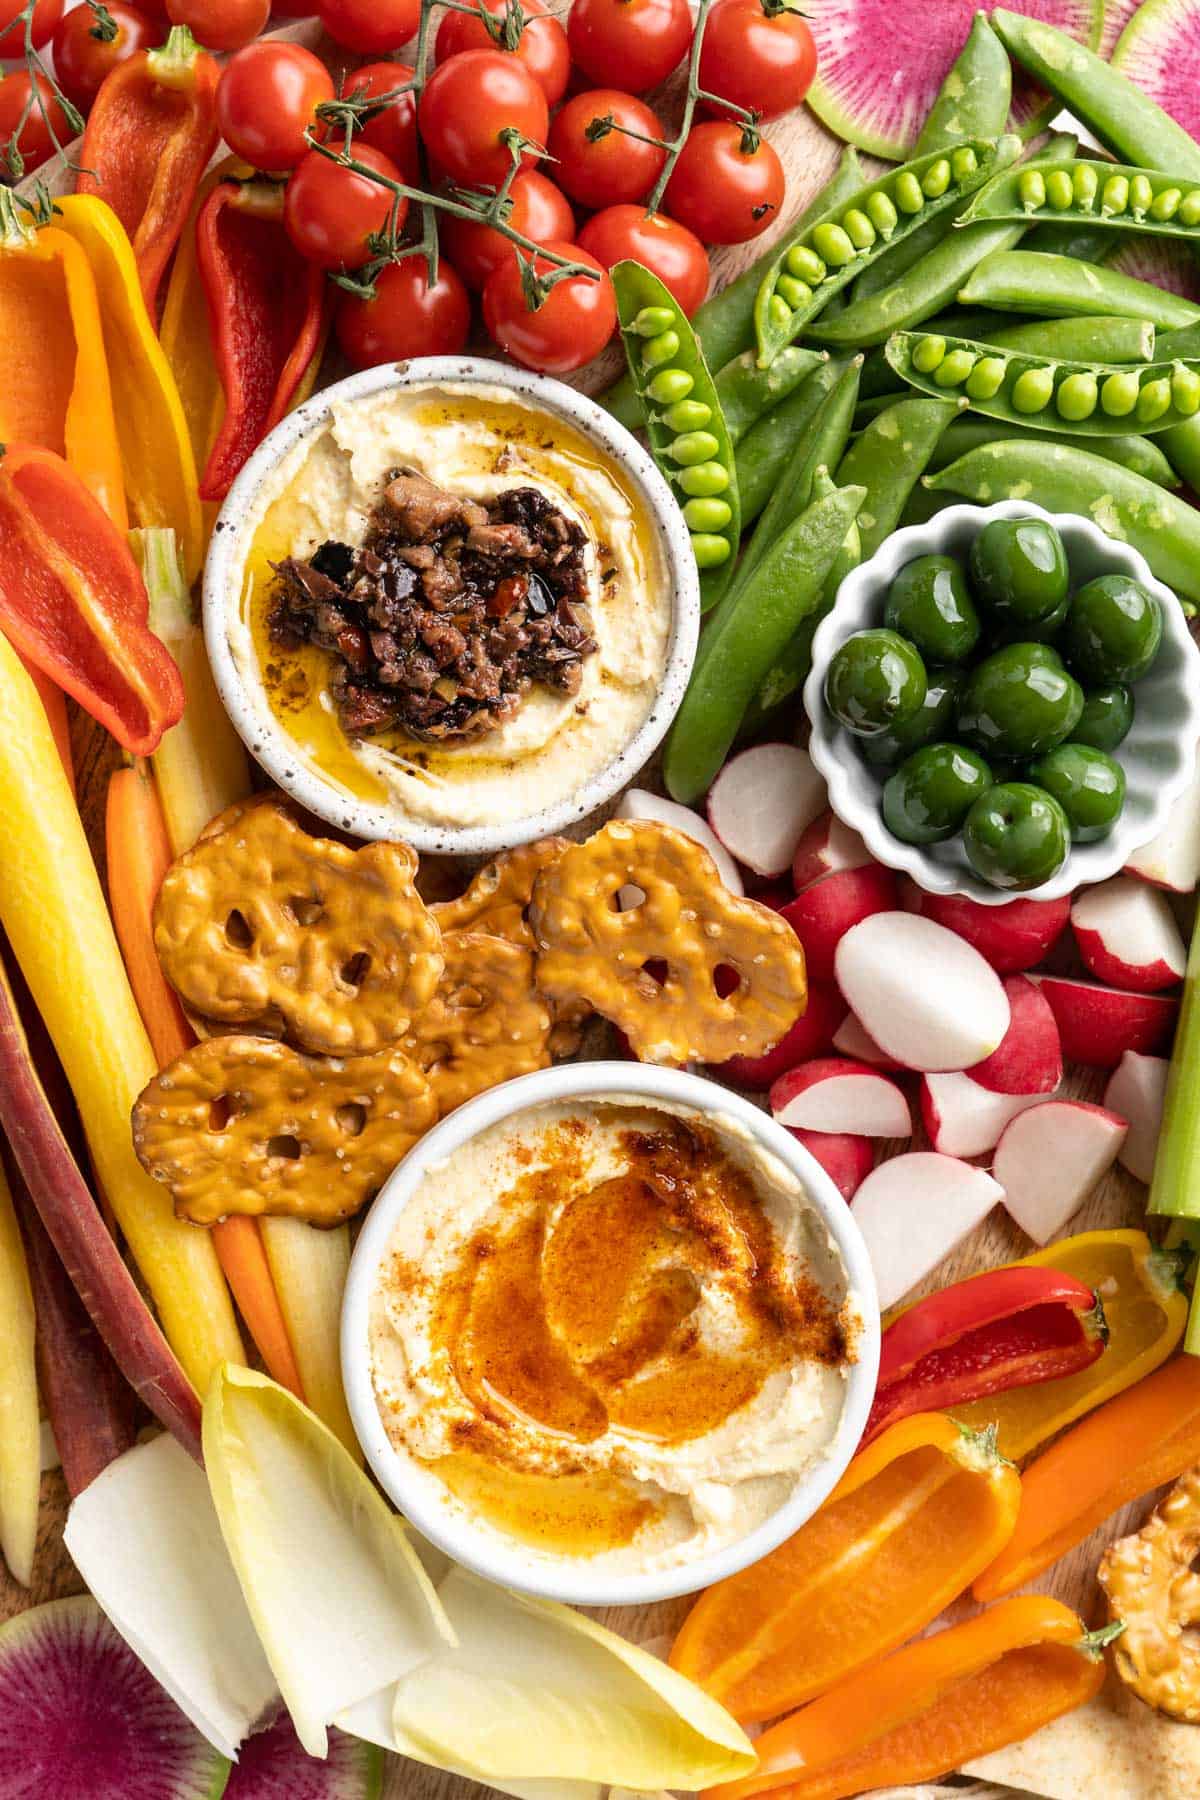 Overhead view of crudité platter with bowls of hummus and green olives